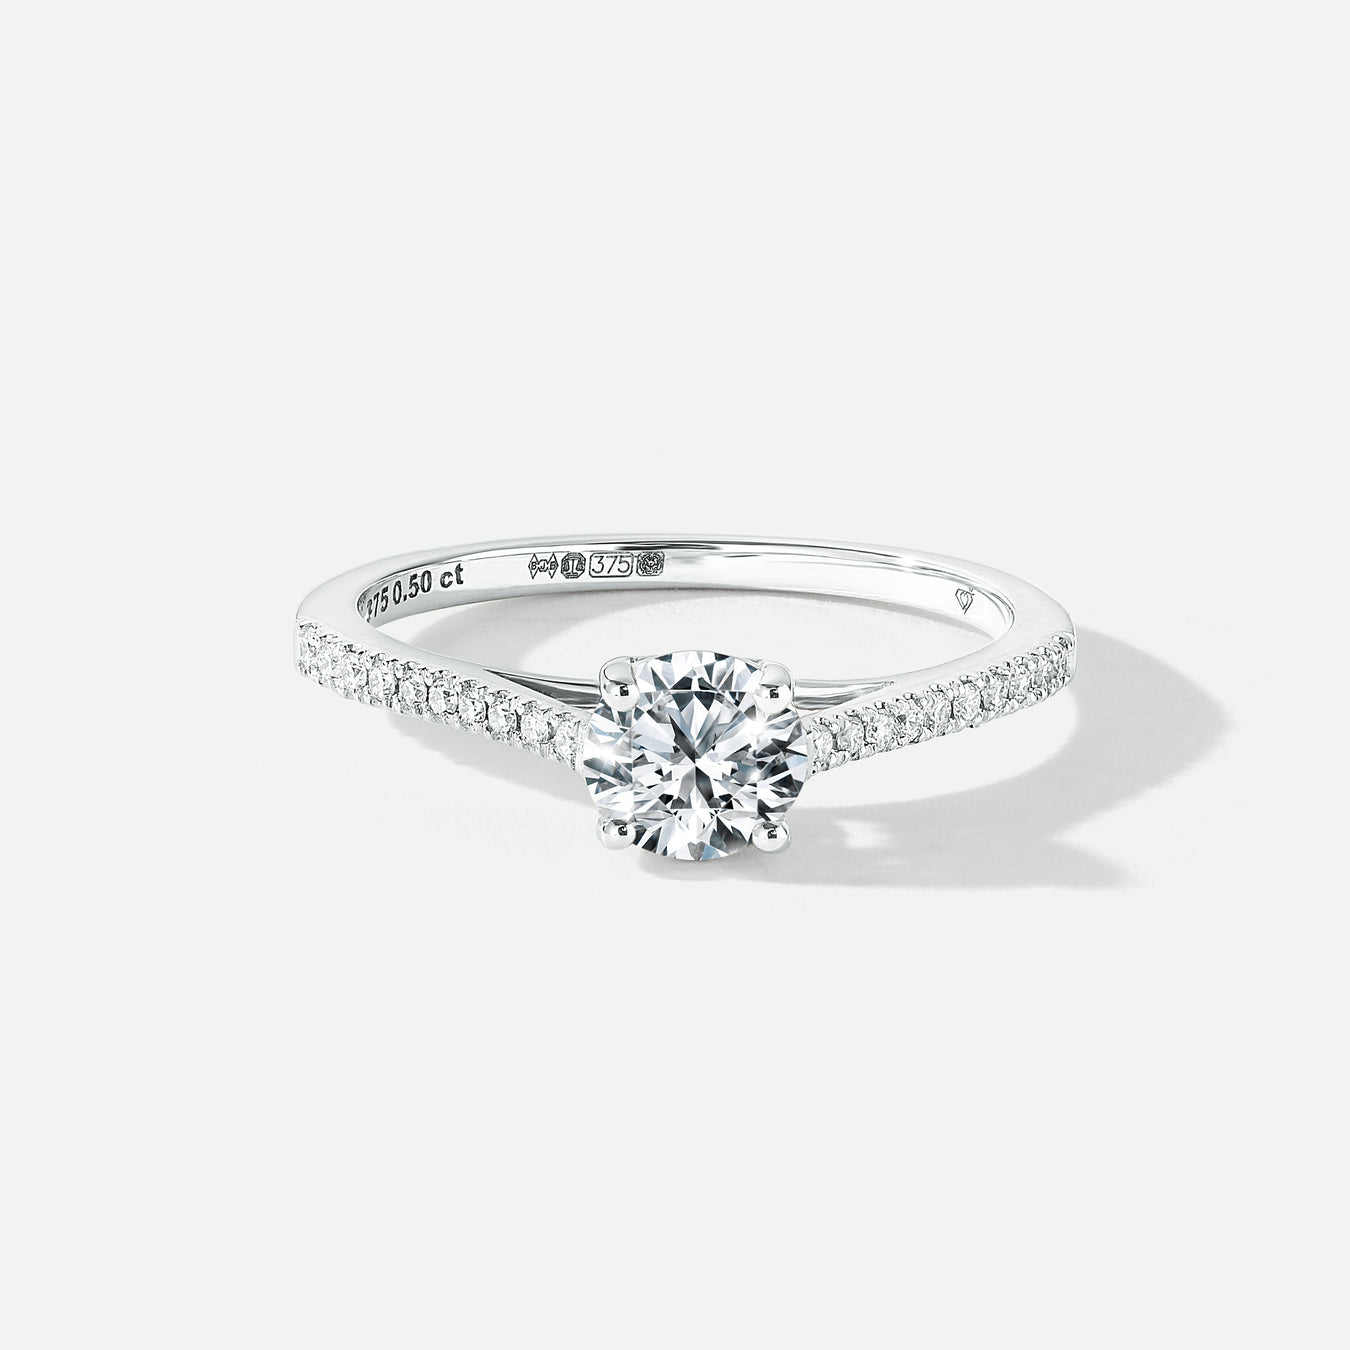 Engagement Rings Under £1000